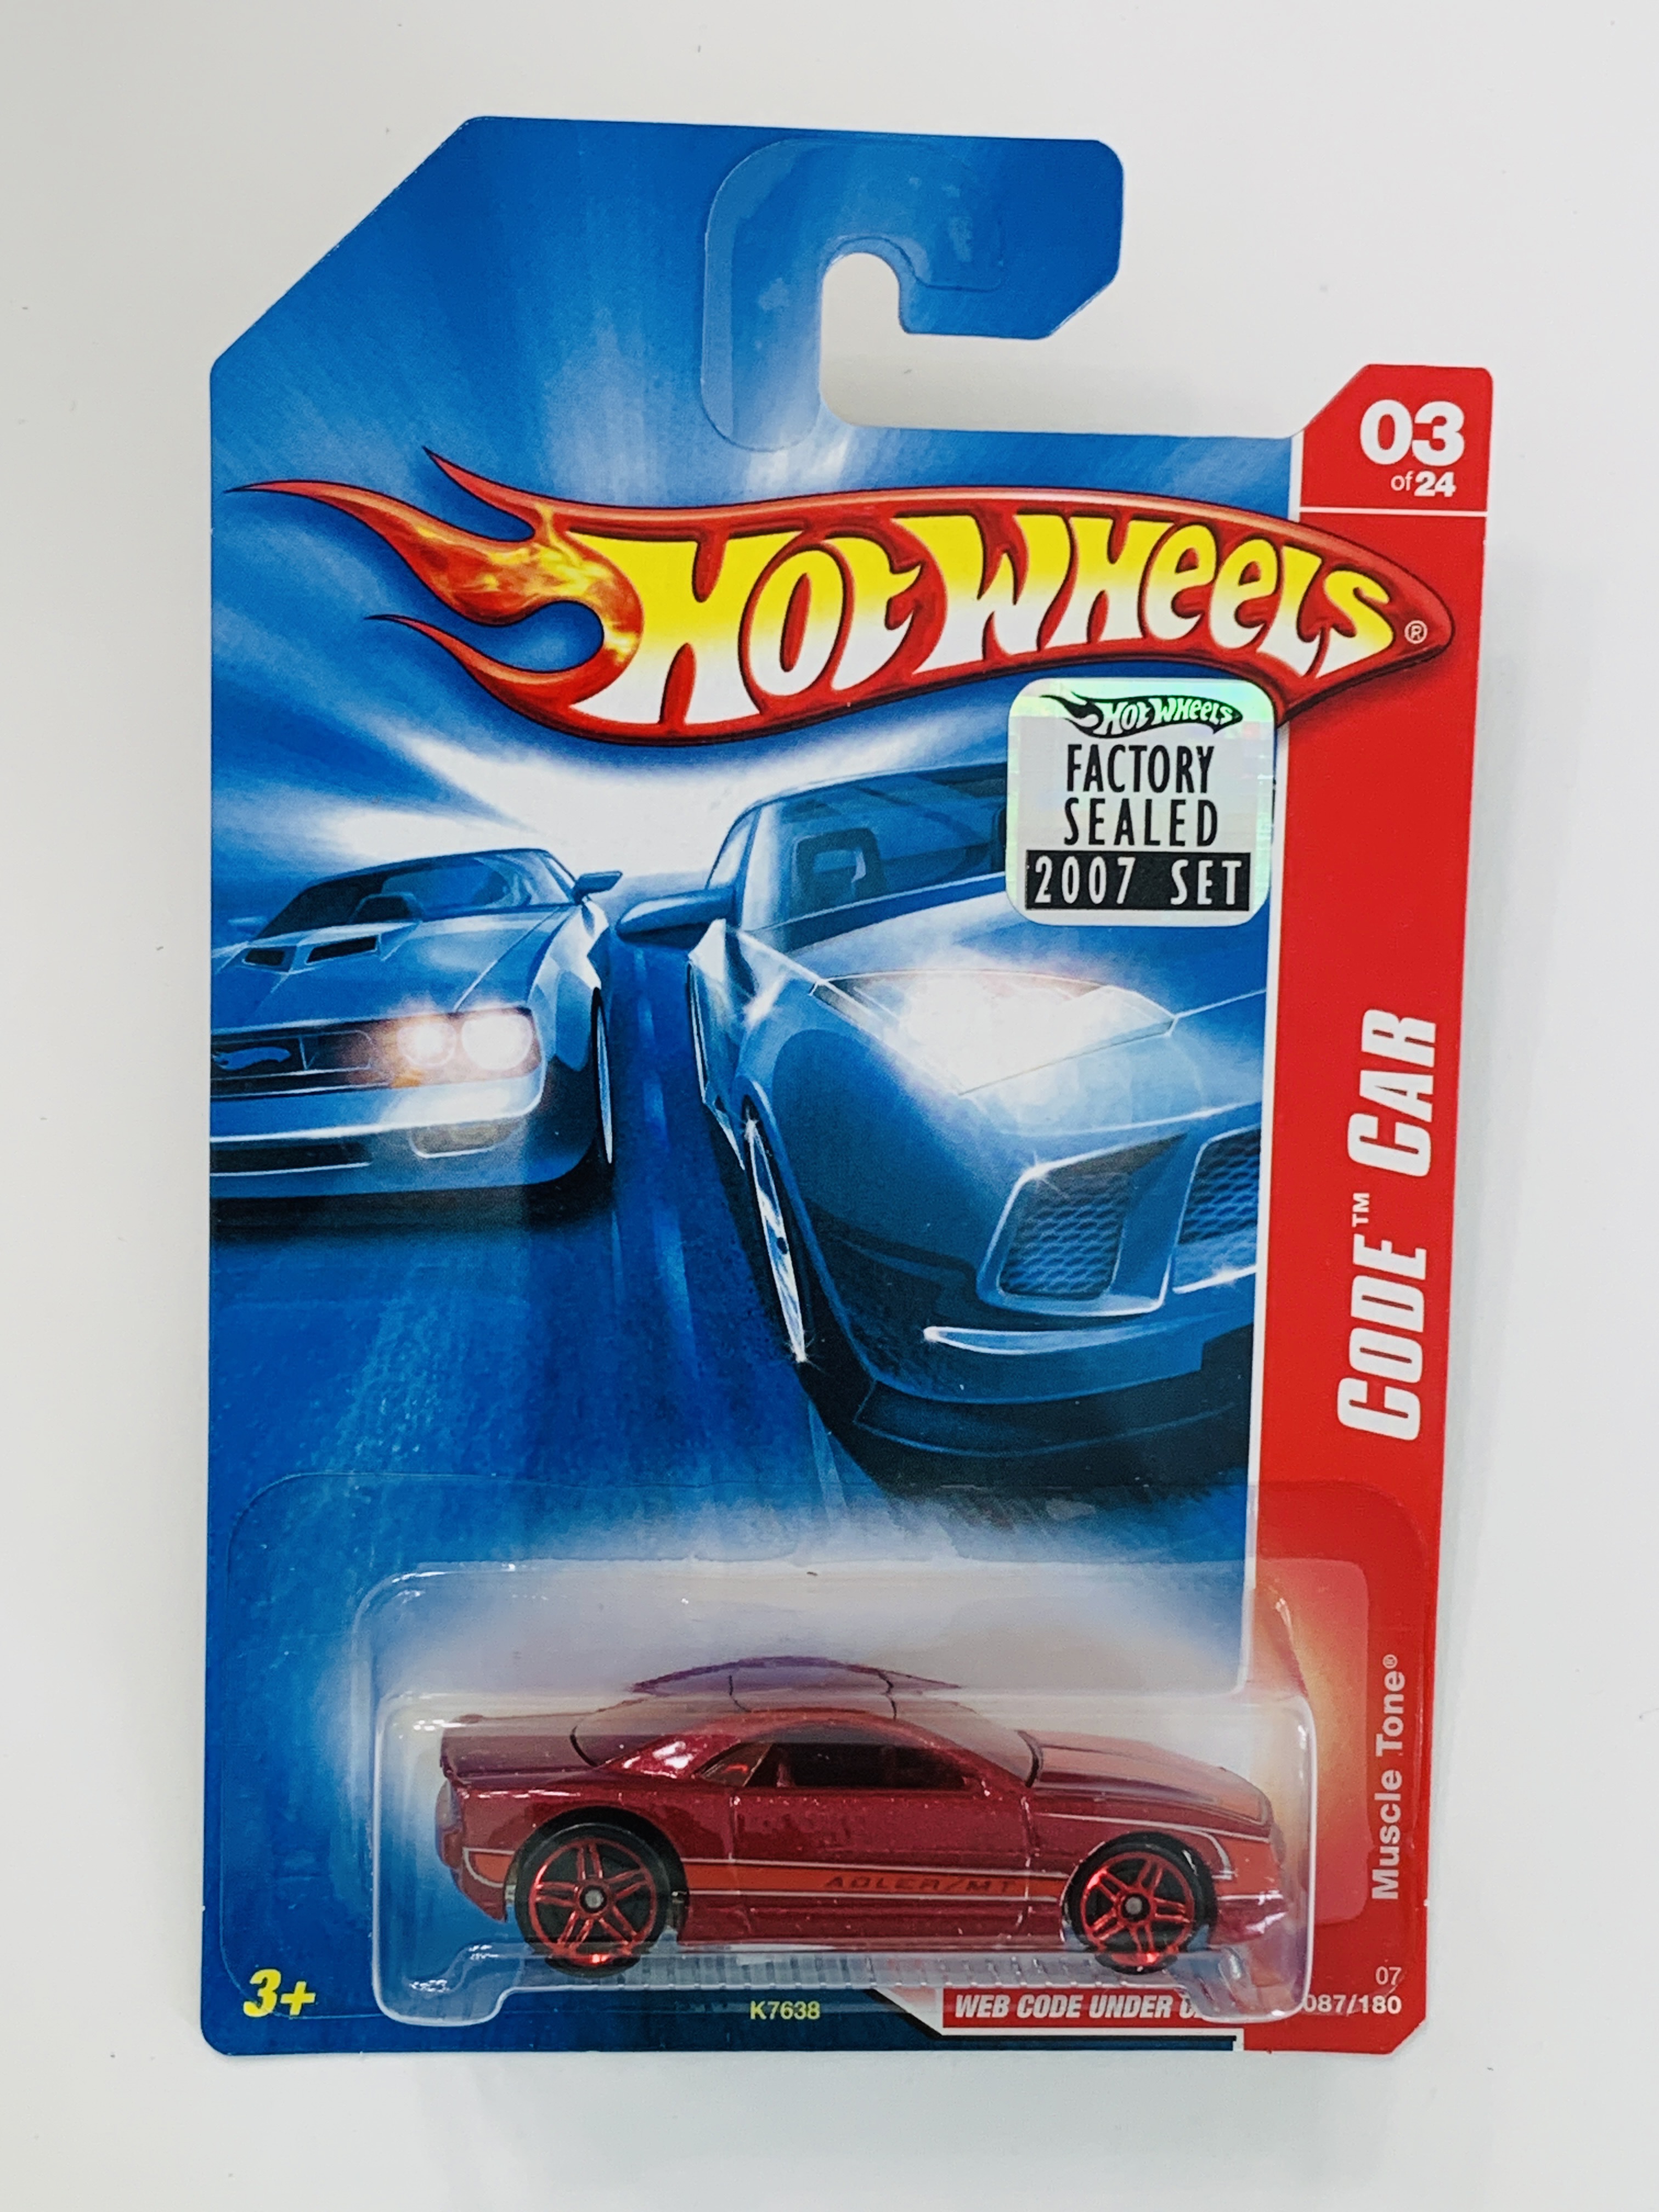 Hot Wheels 2007 Factory Set #087 Muscle Tone - Red